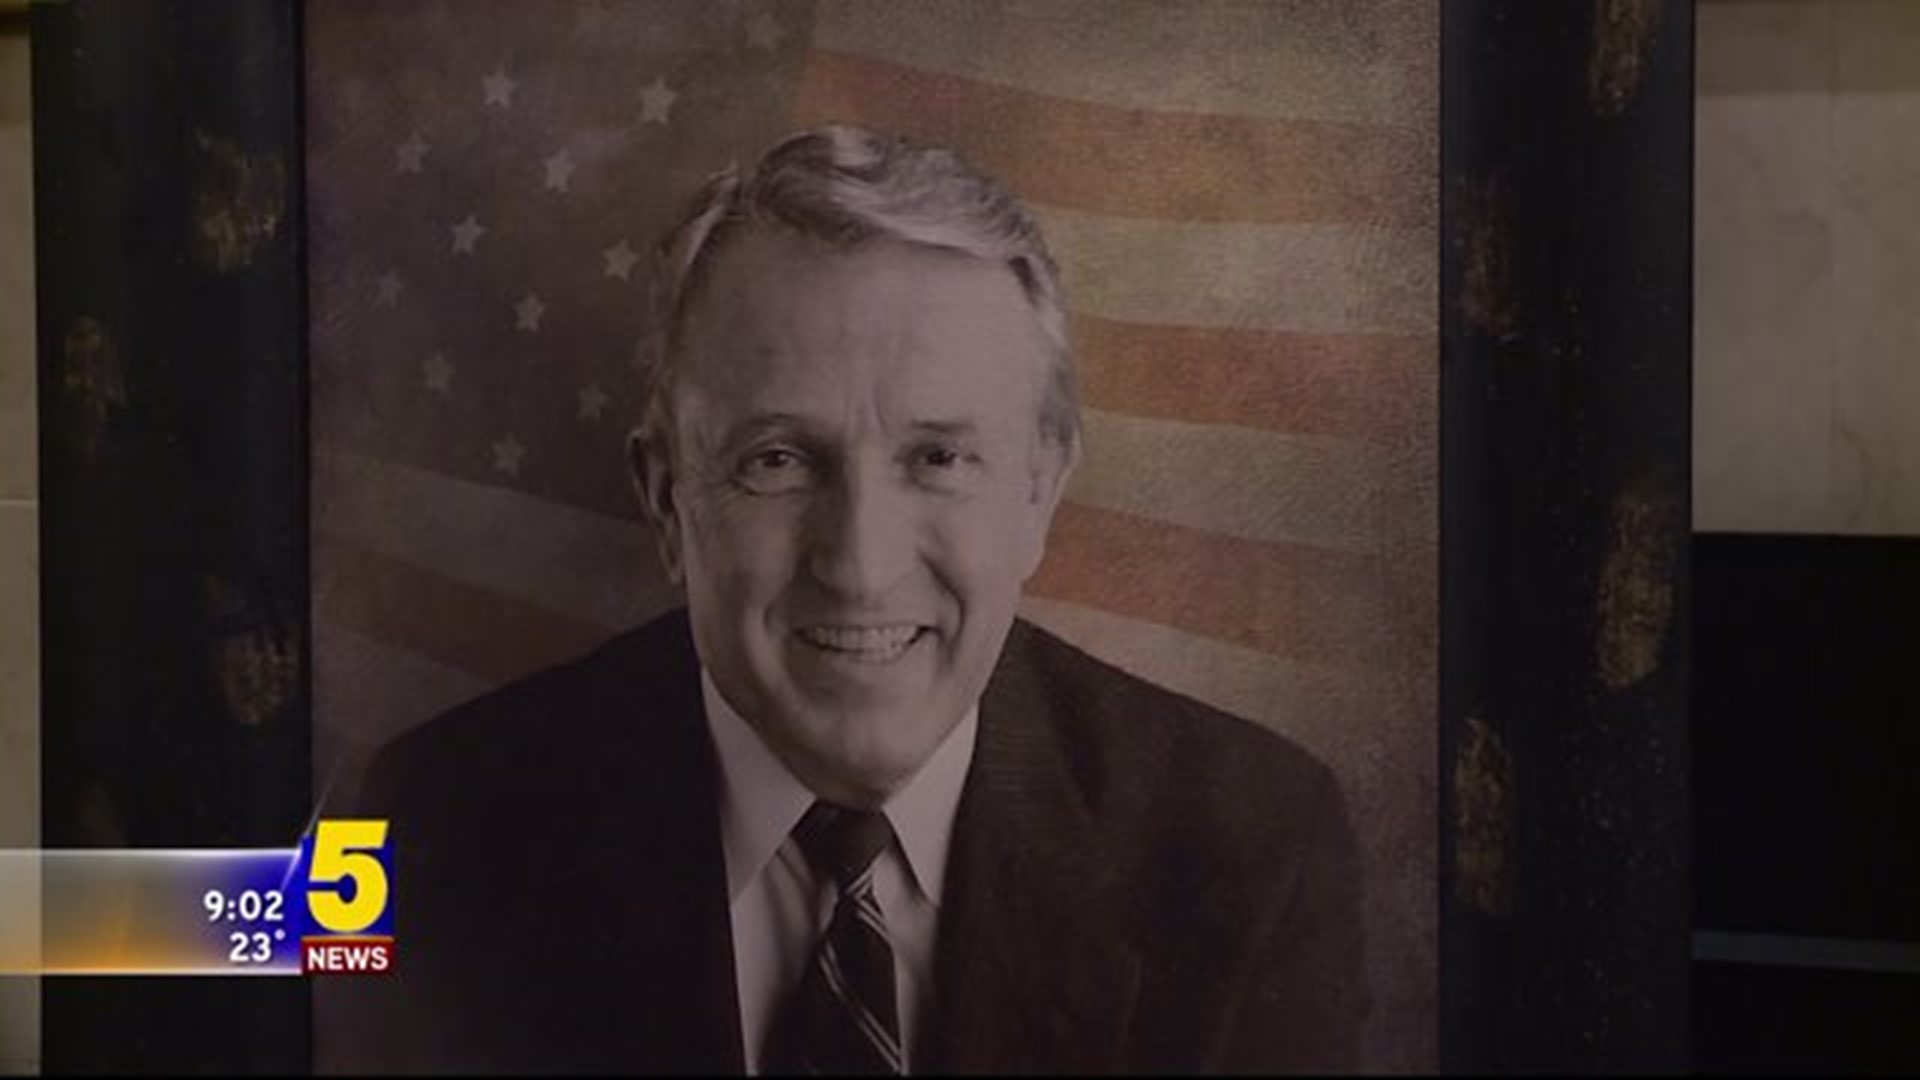 Memorial Service Scheduled for Monday